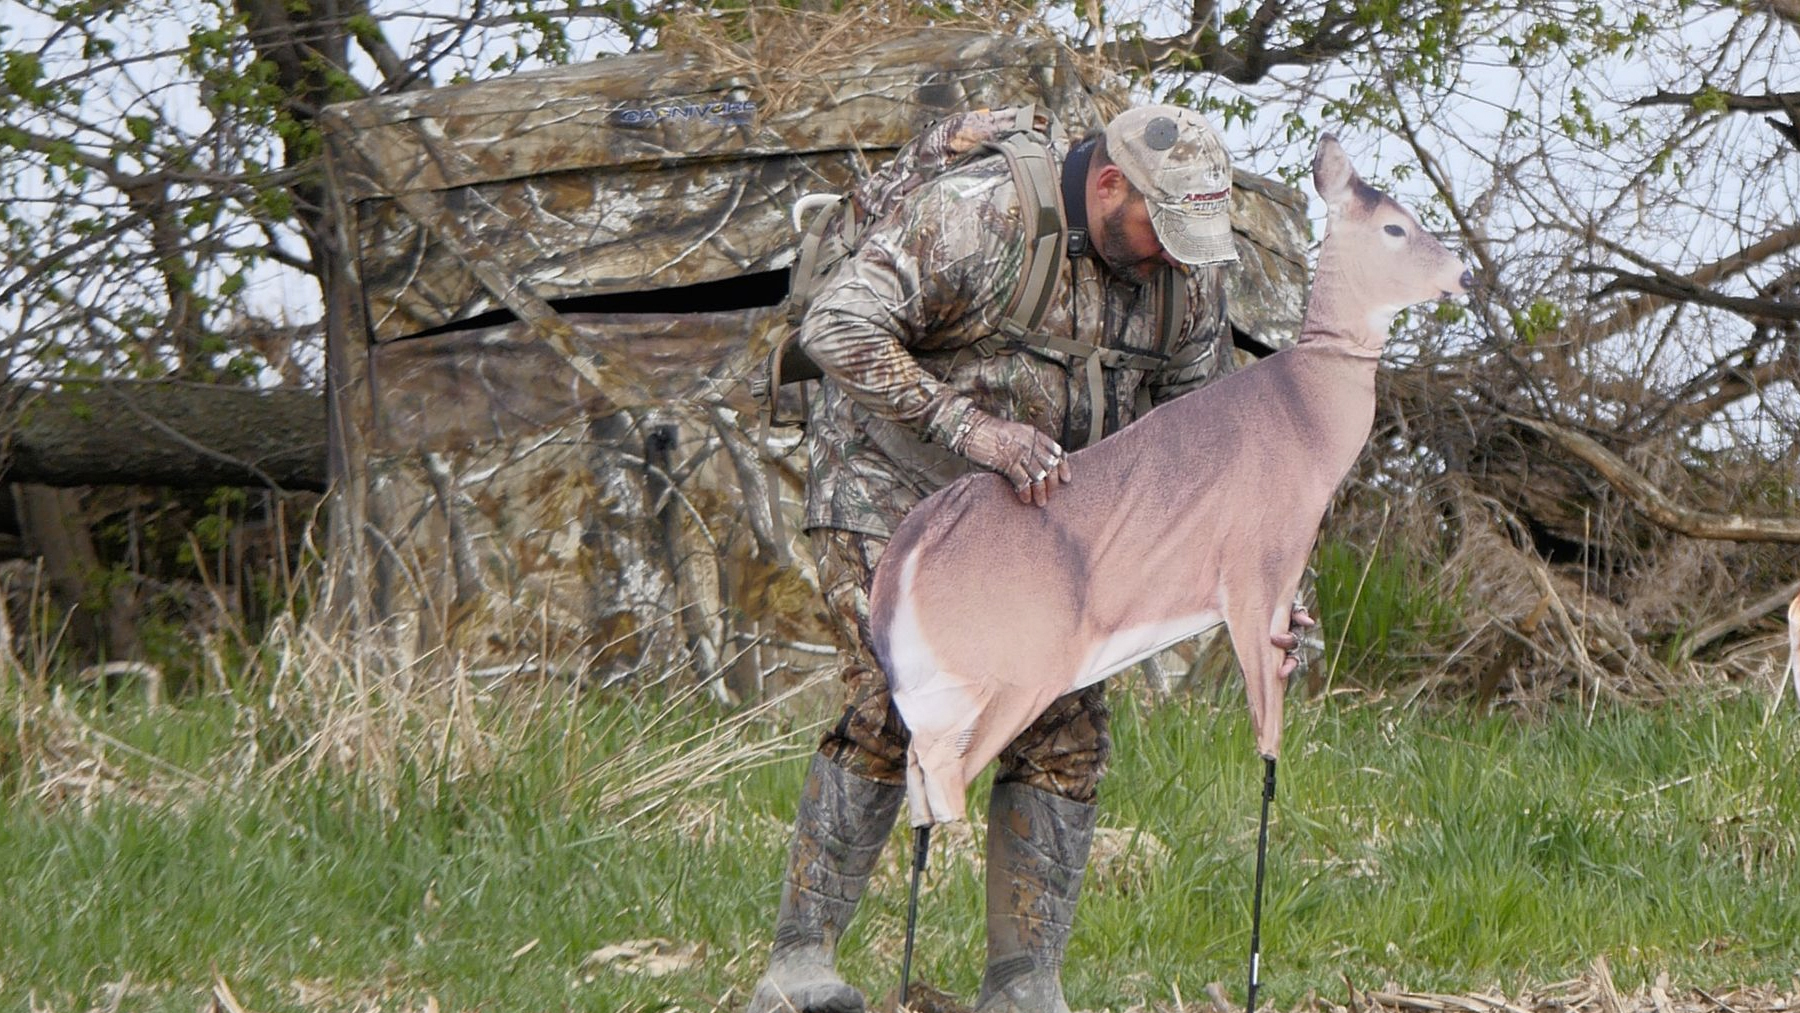 Clancy was a big proponent of using decoys during the early season to fill his freezer.